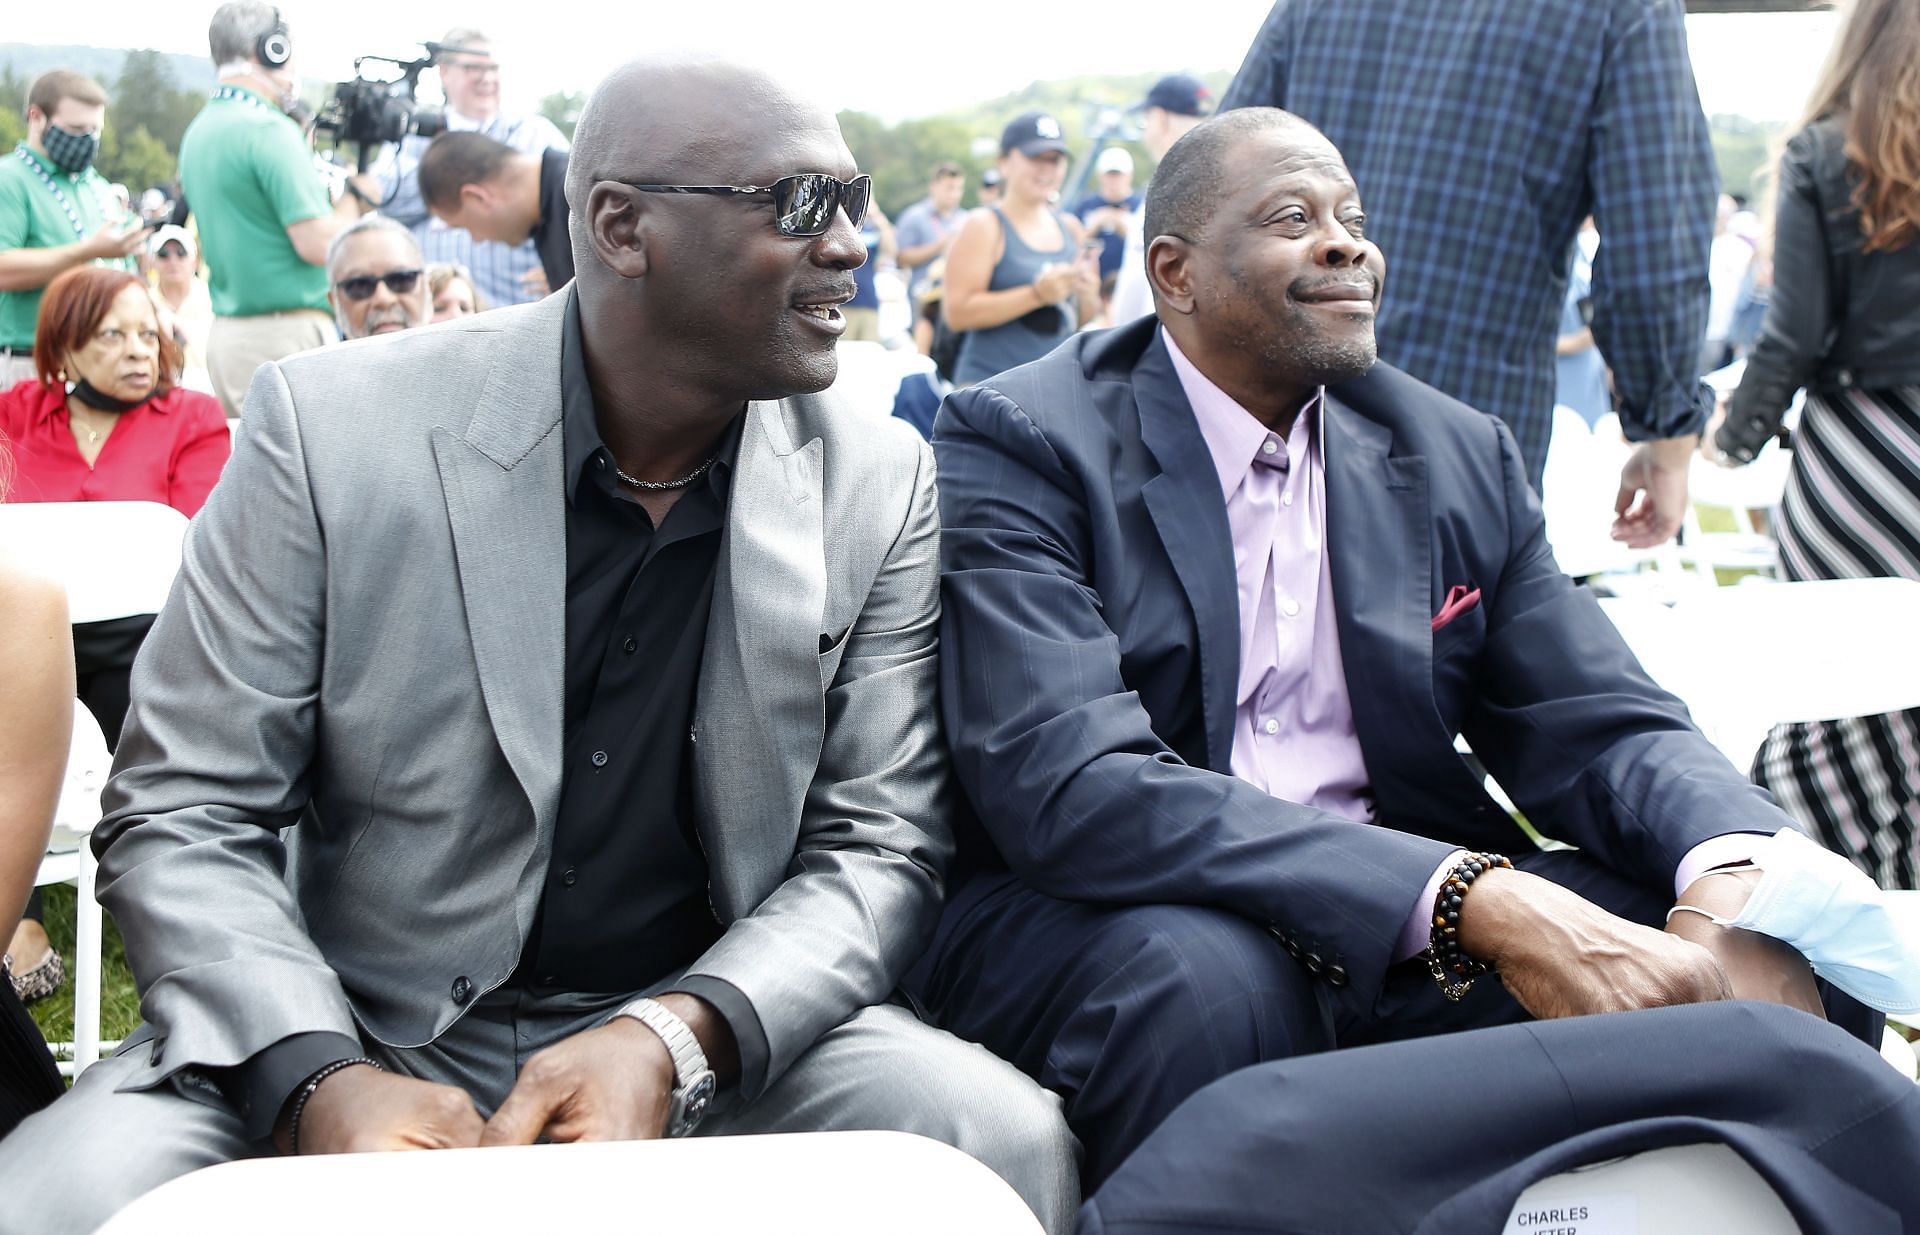 Michael Jordan and Patrick Ewing competed often during their peaks (Image via Getty Images)